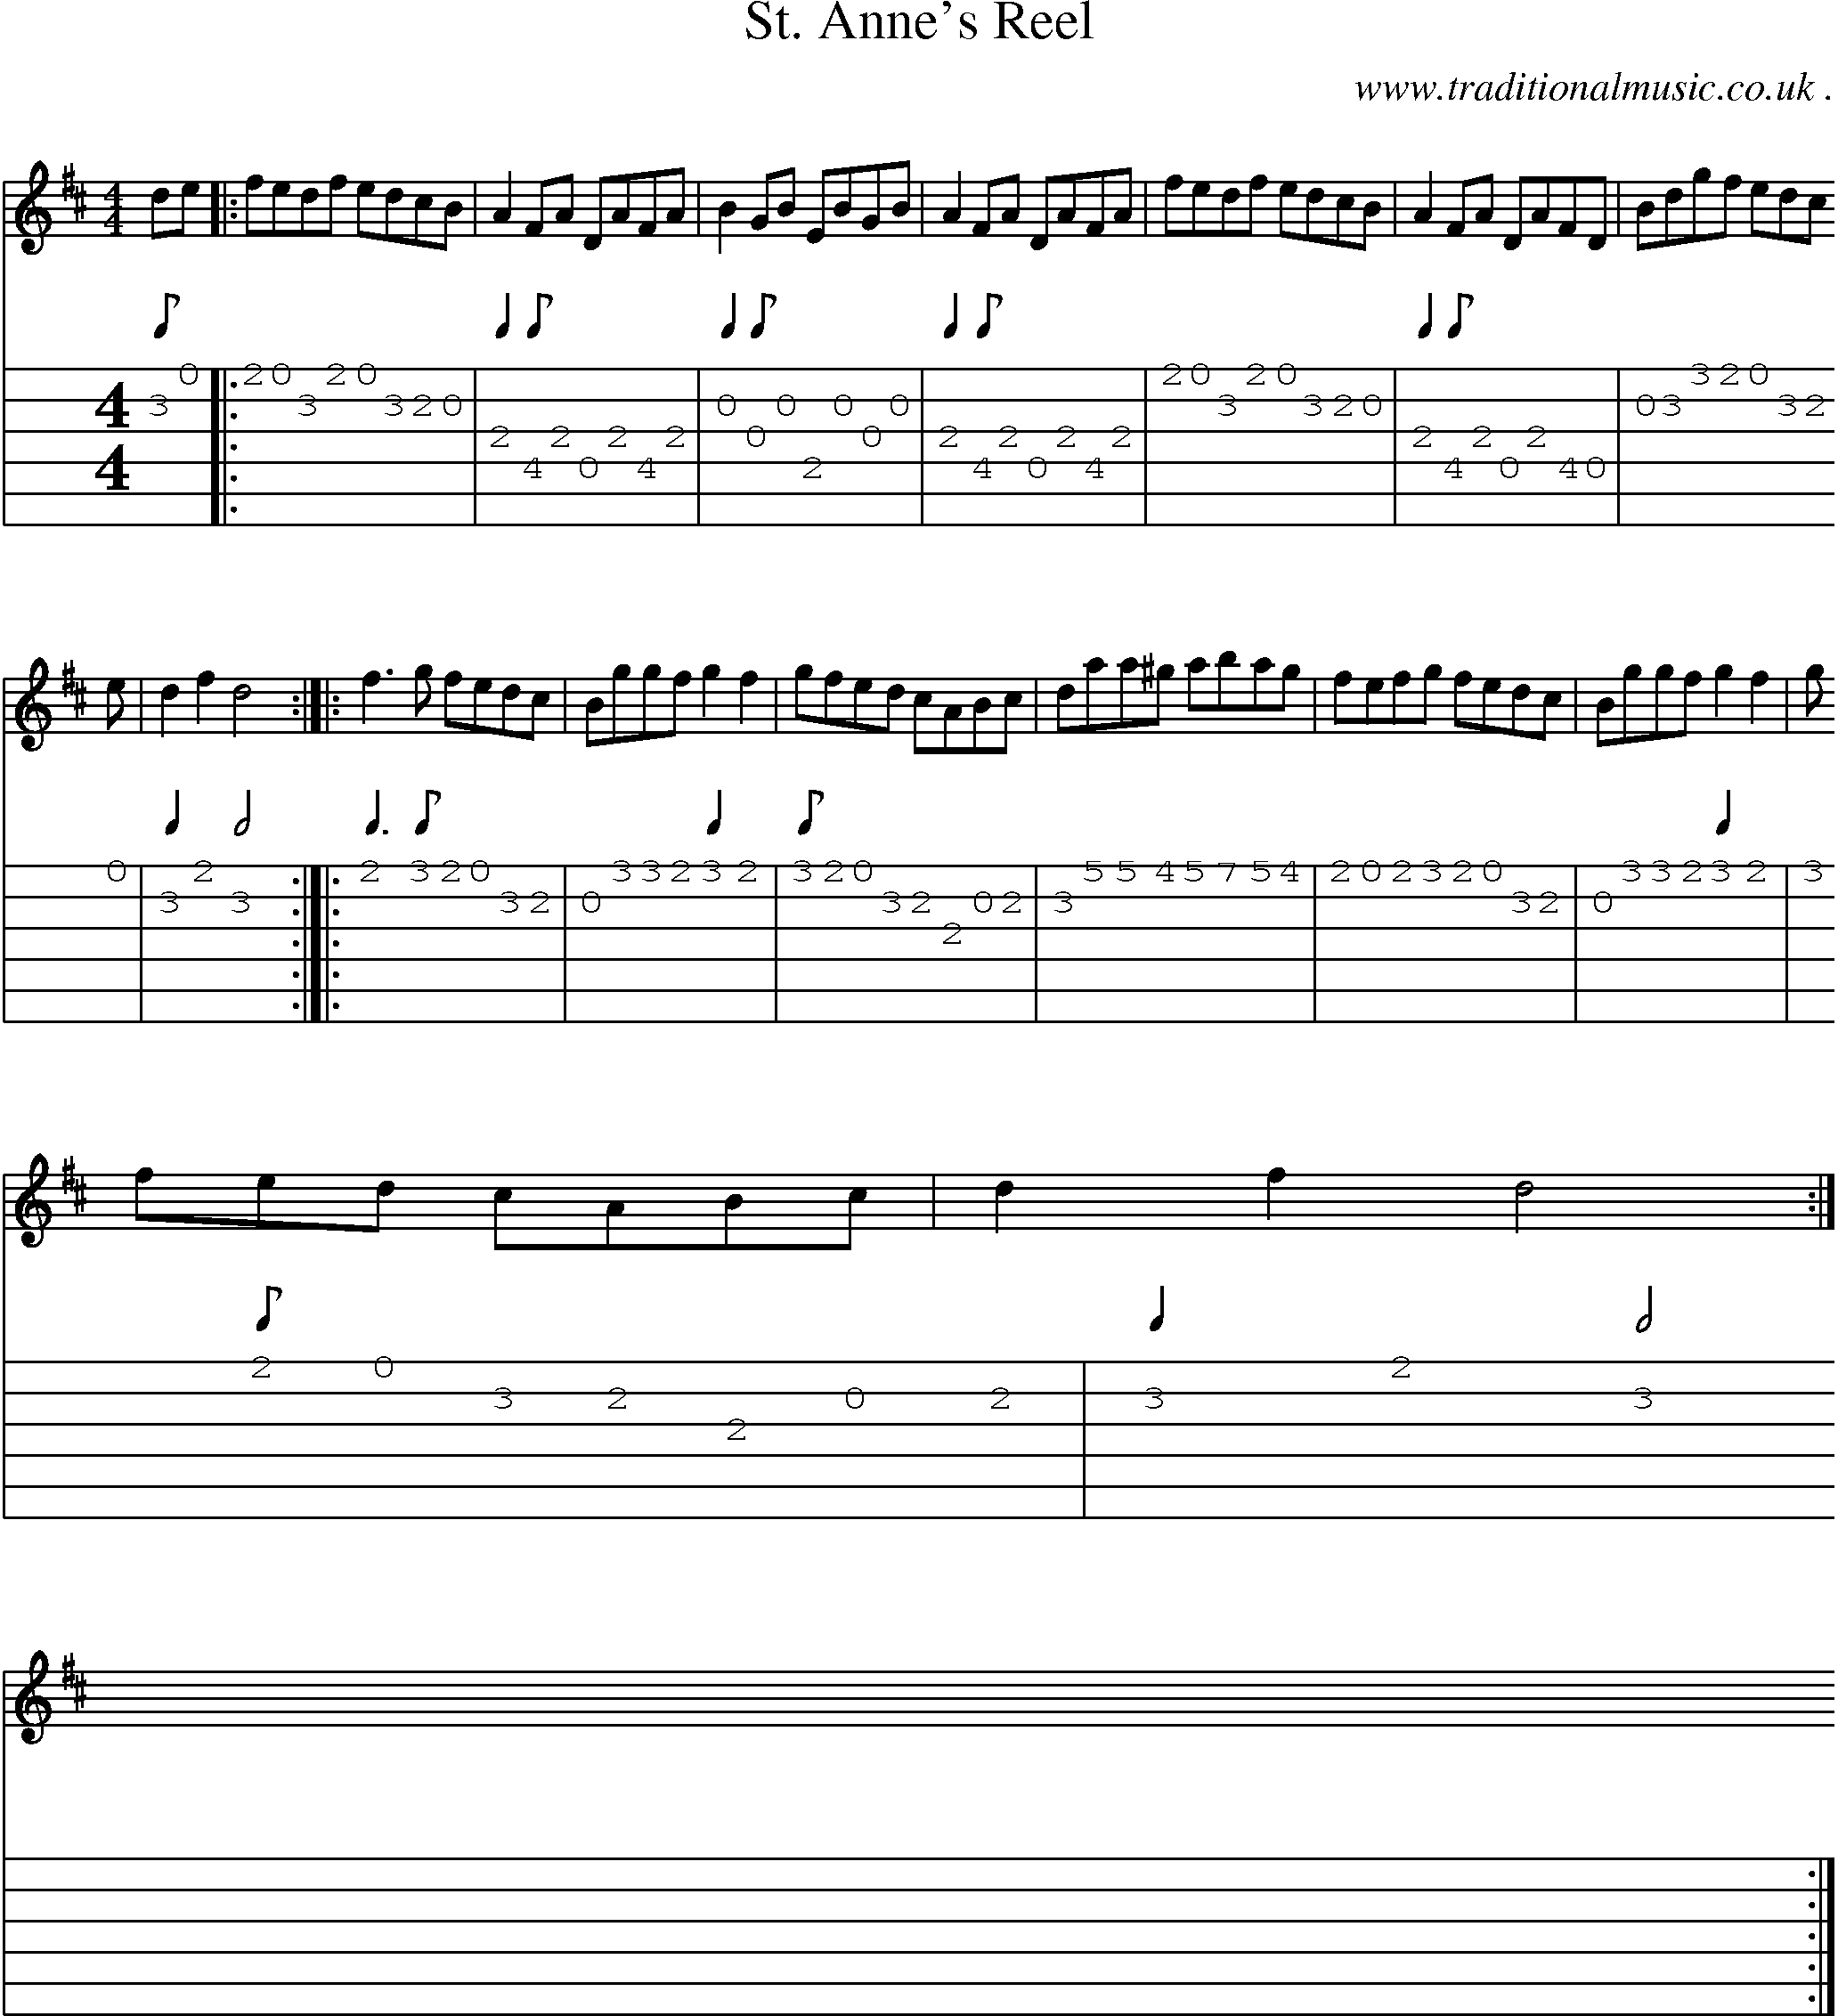 Sheet-Music and Guitar Tabs for St Annes Reel